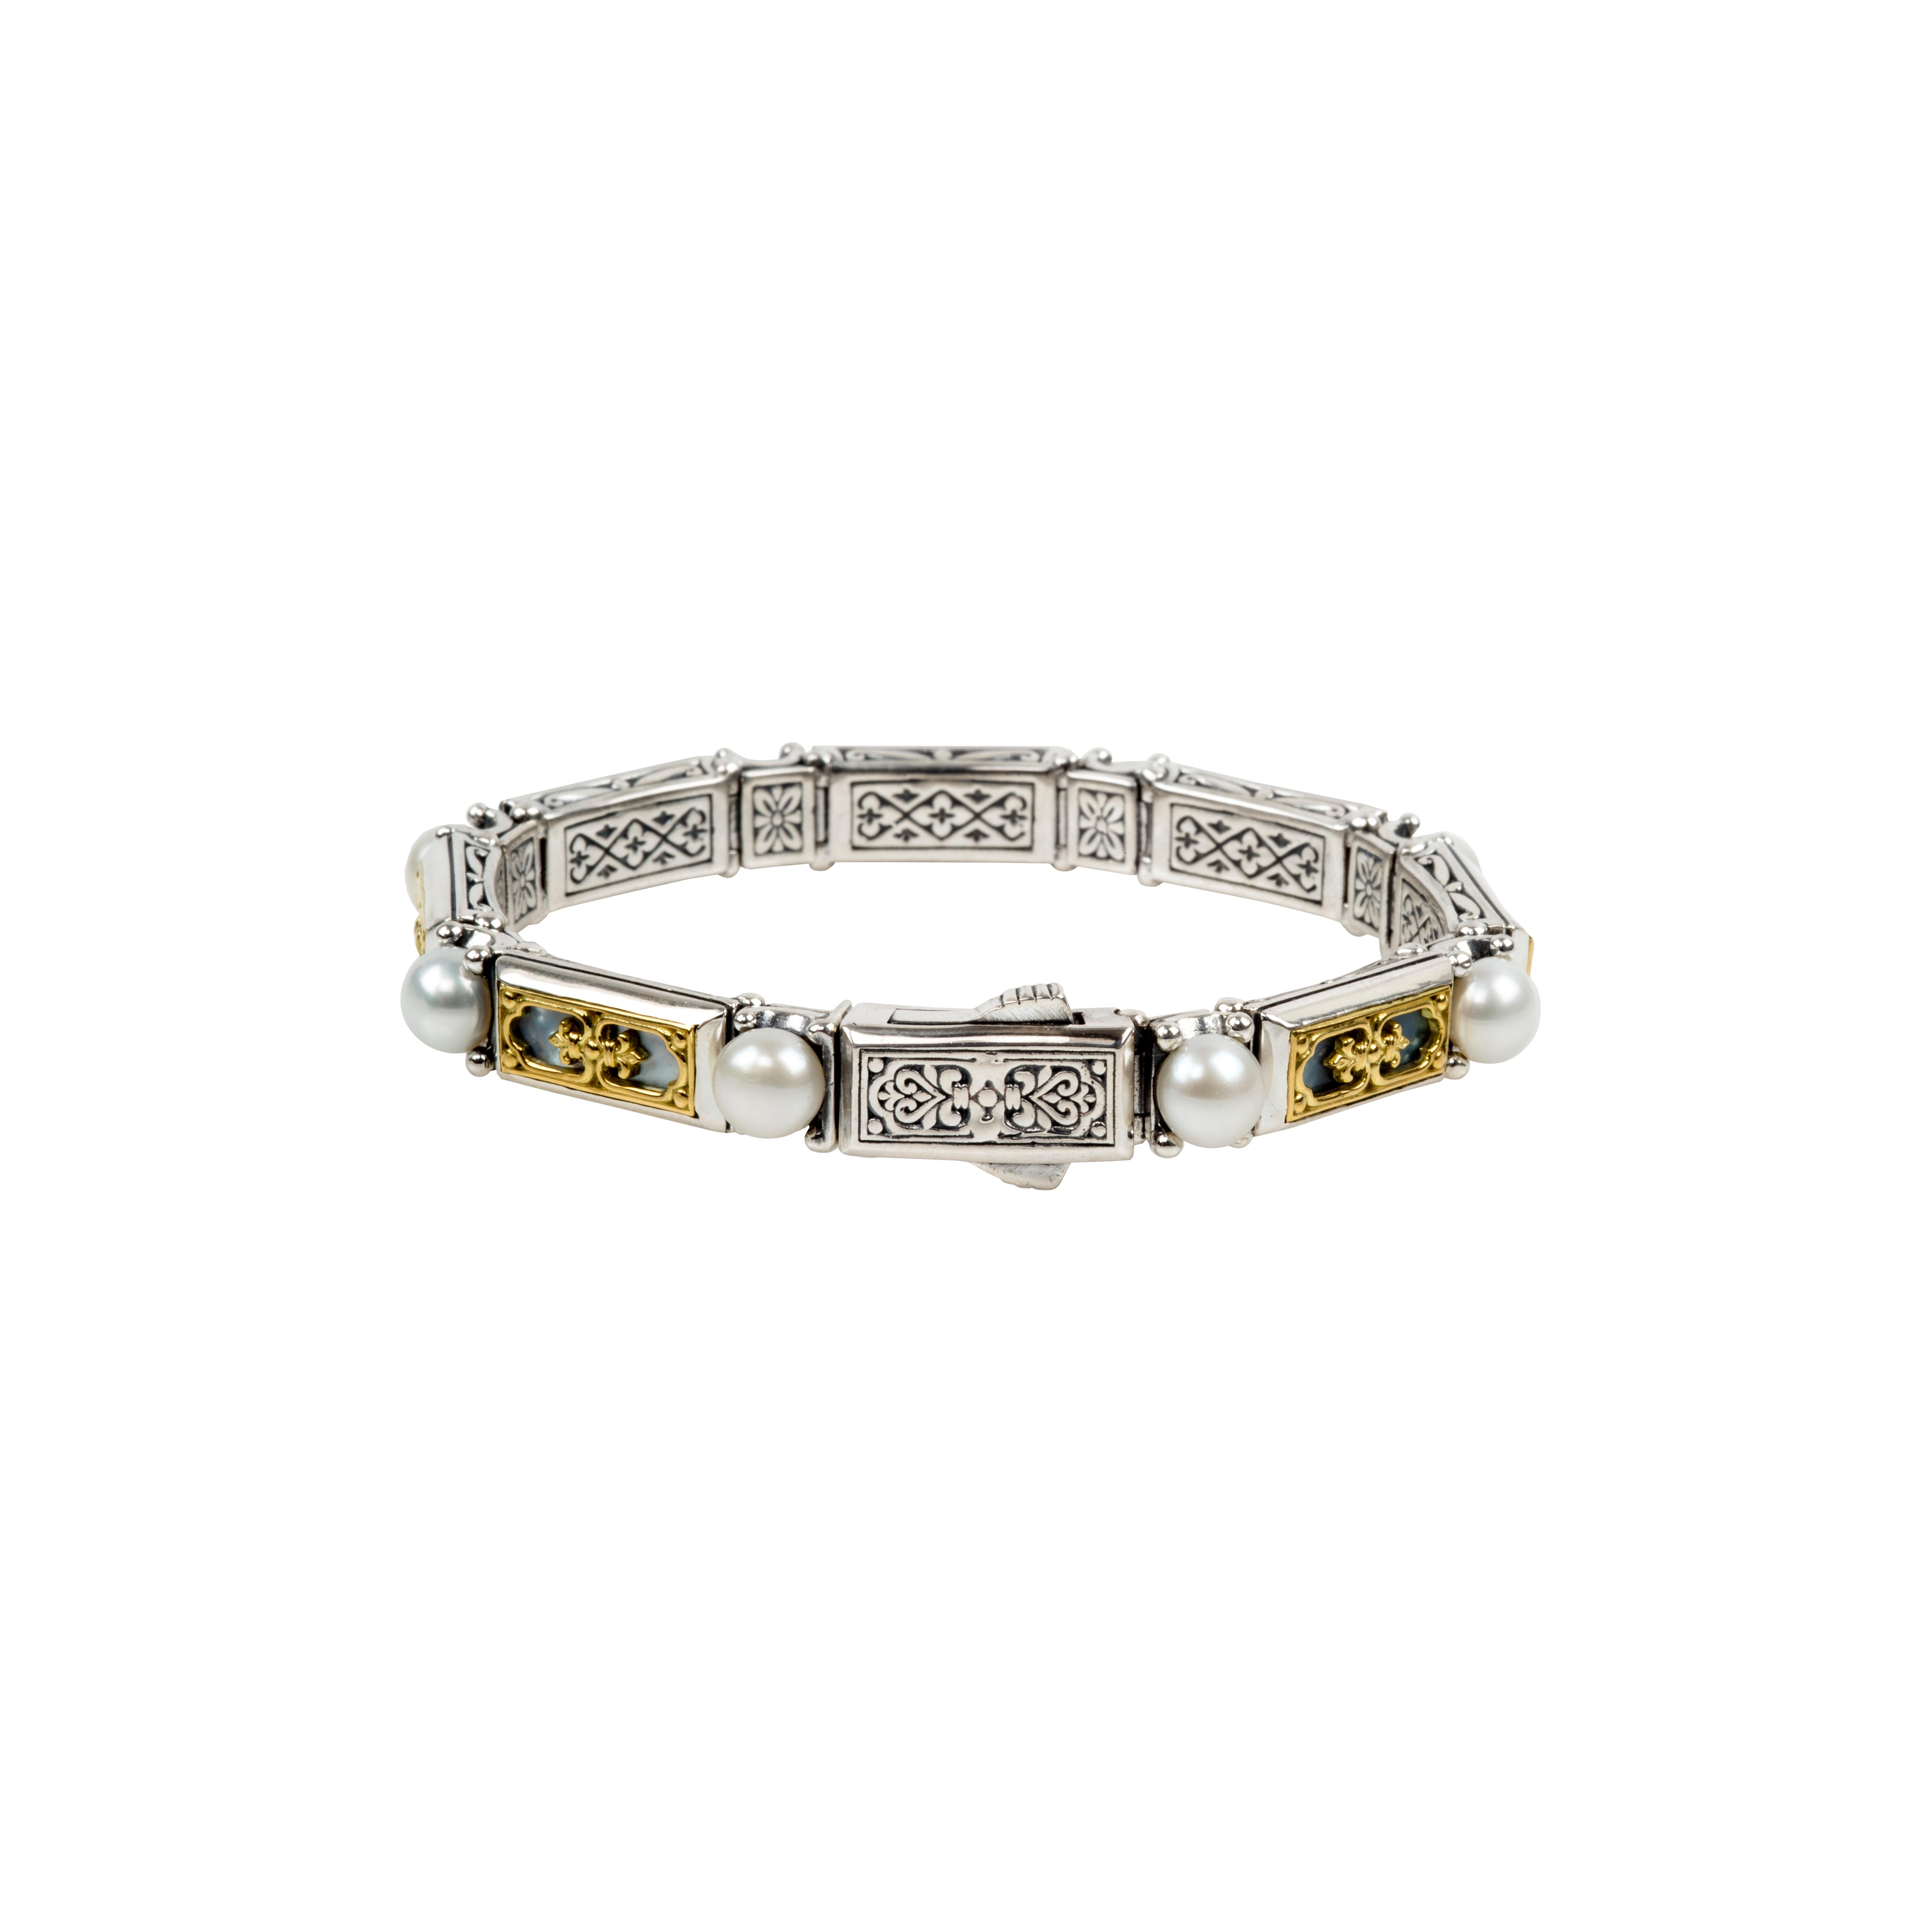 Gemstone: Mother of Pearl & Pearl
Material: Sterling Silver & 18k Gold
Size: One Size

Stamped: 750, 925, KONSTANTINO, 